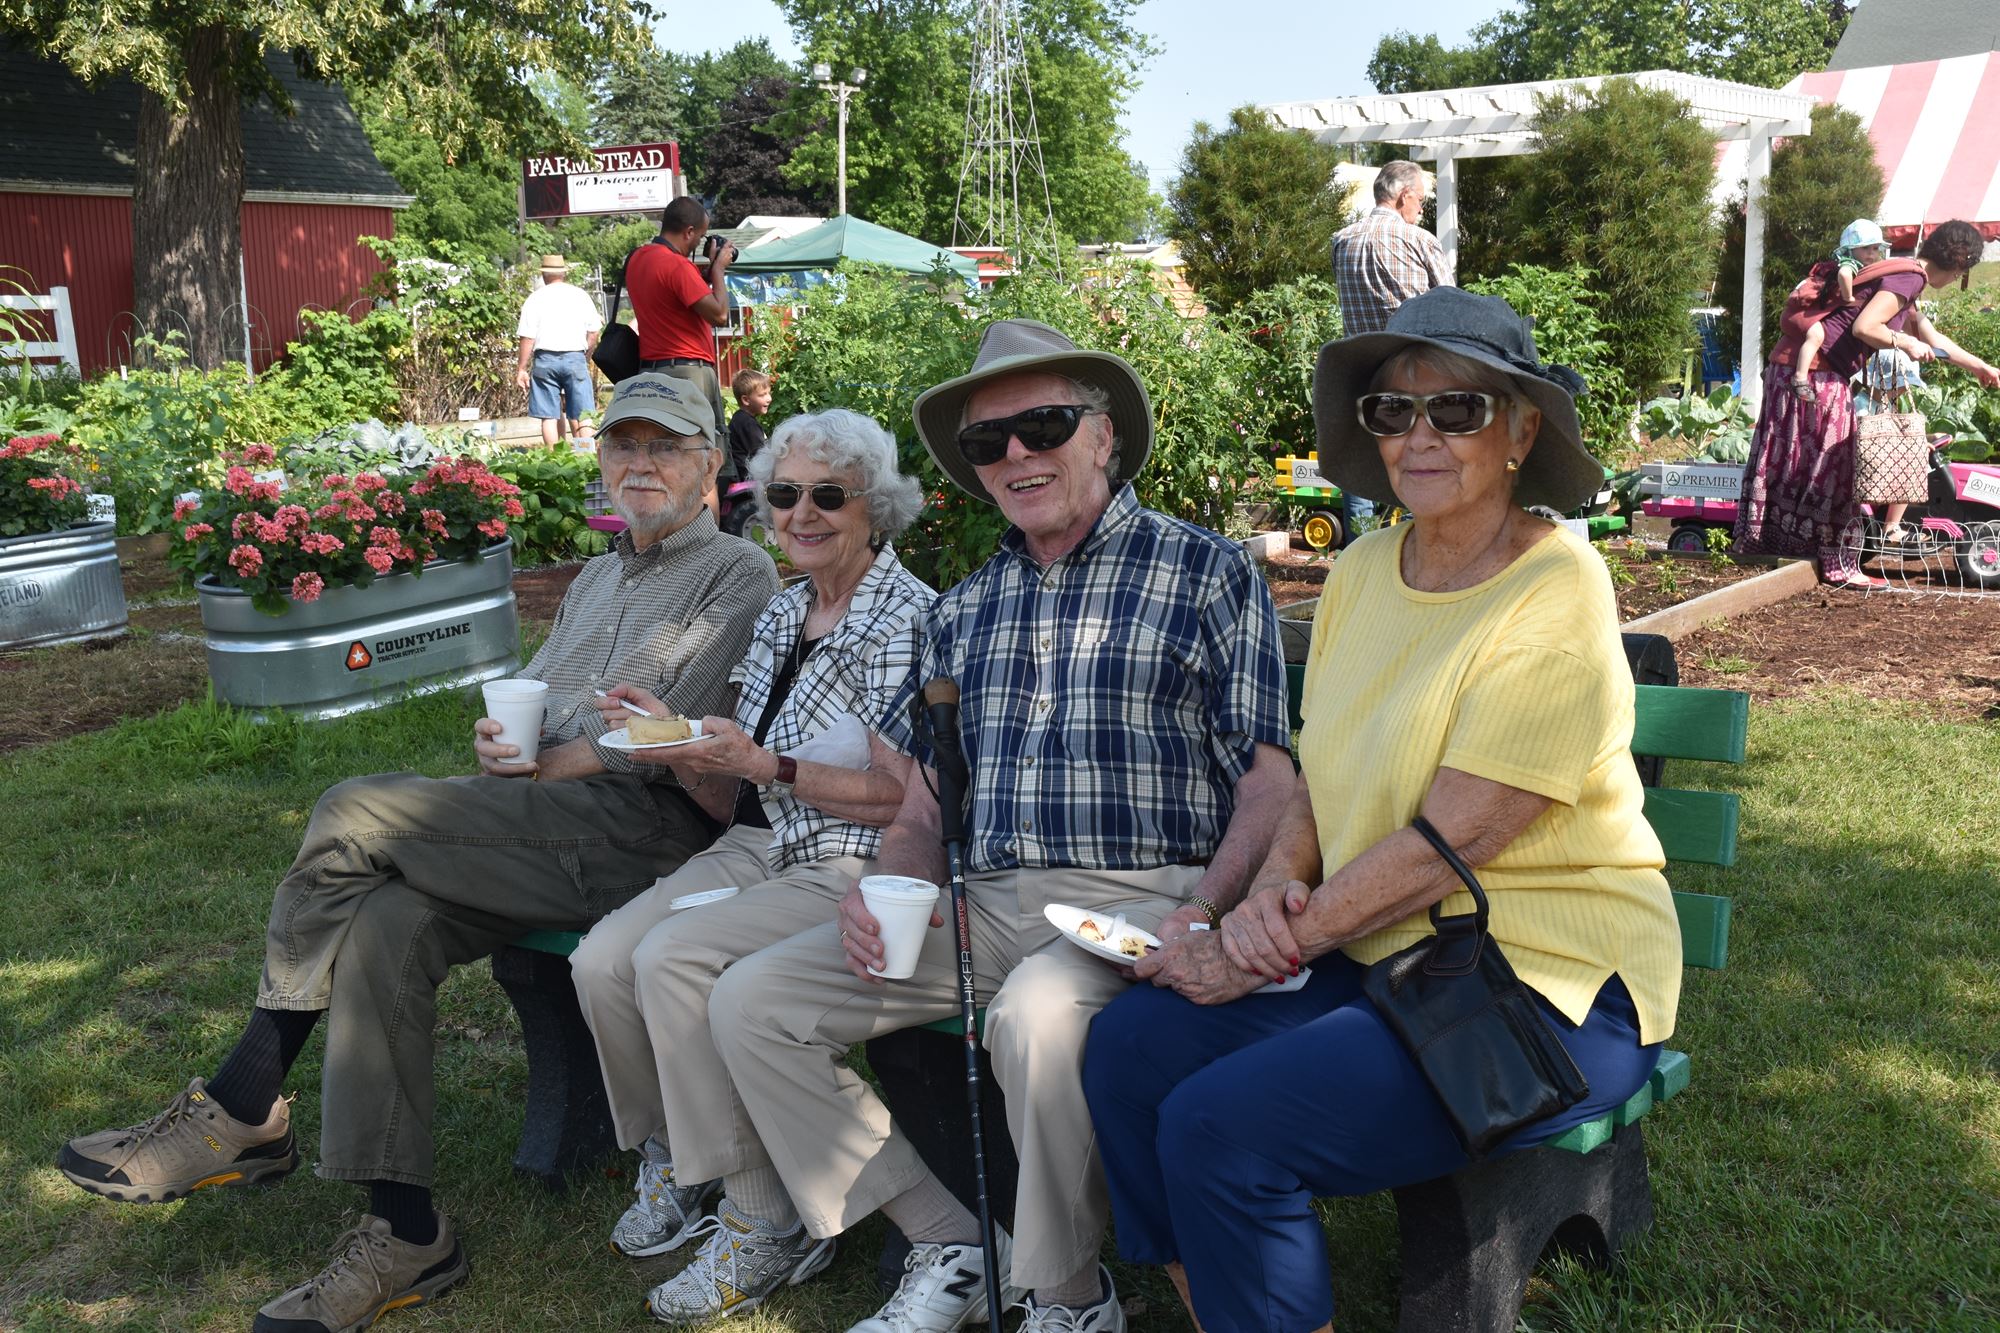 Senior Citizens Day - Tuesday, July 27